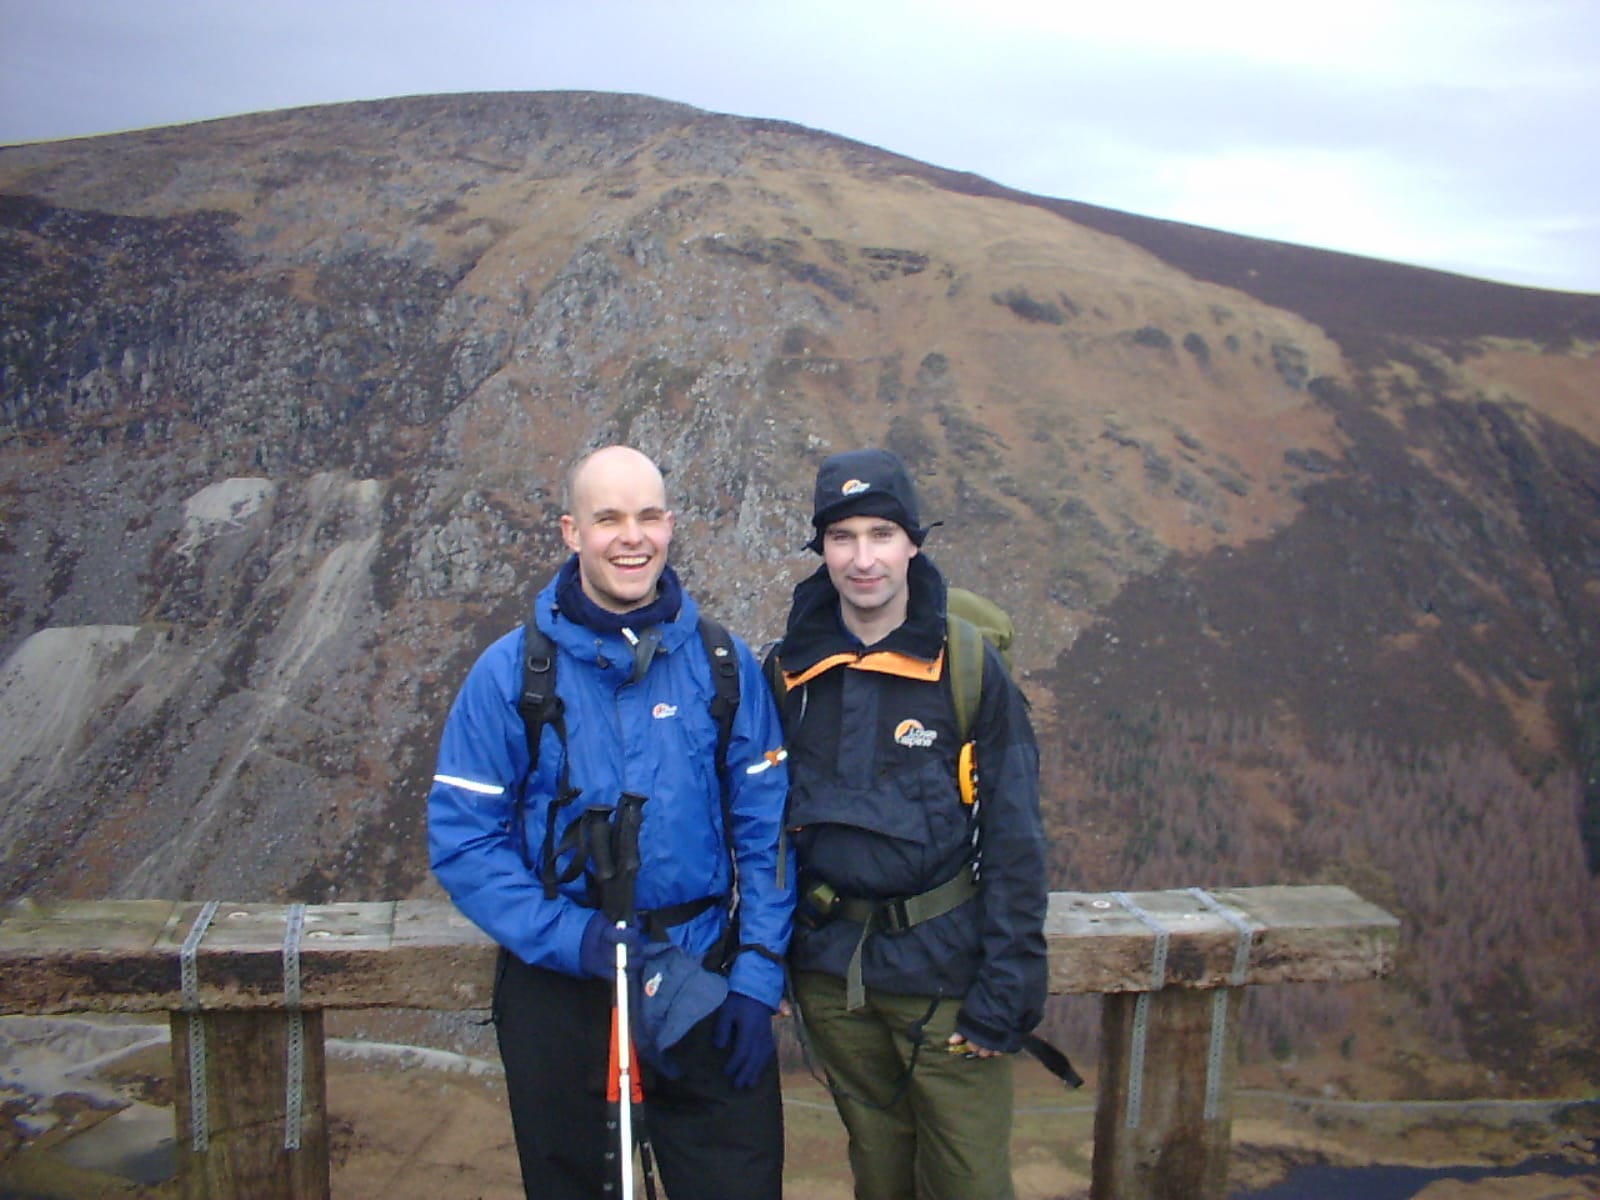 Mark Pollock and John ORegan stand before a mountainous landscape. Mark is wearing a blue jacket, holding two poles and John is wearing a navy jacket and hat. 